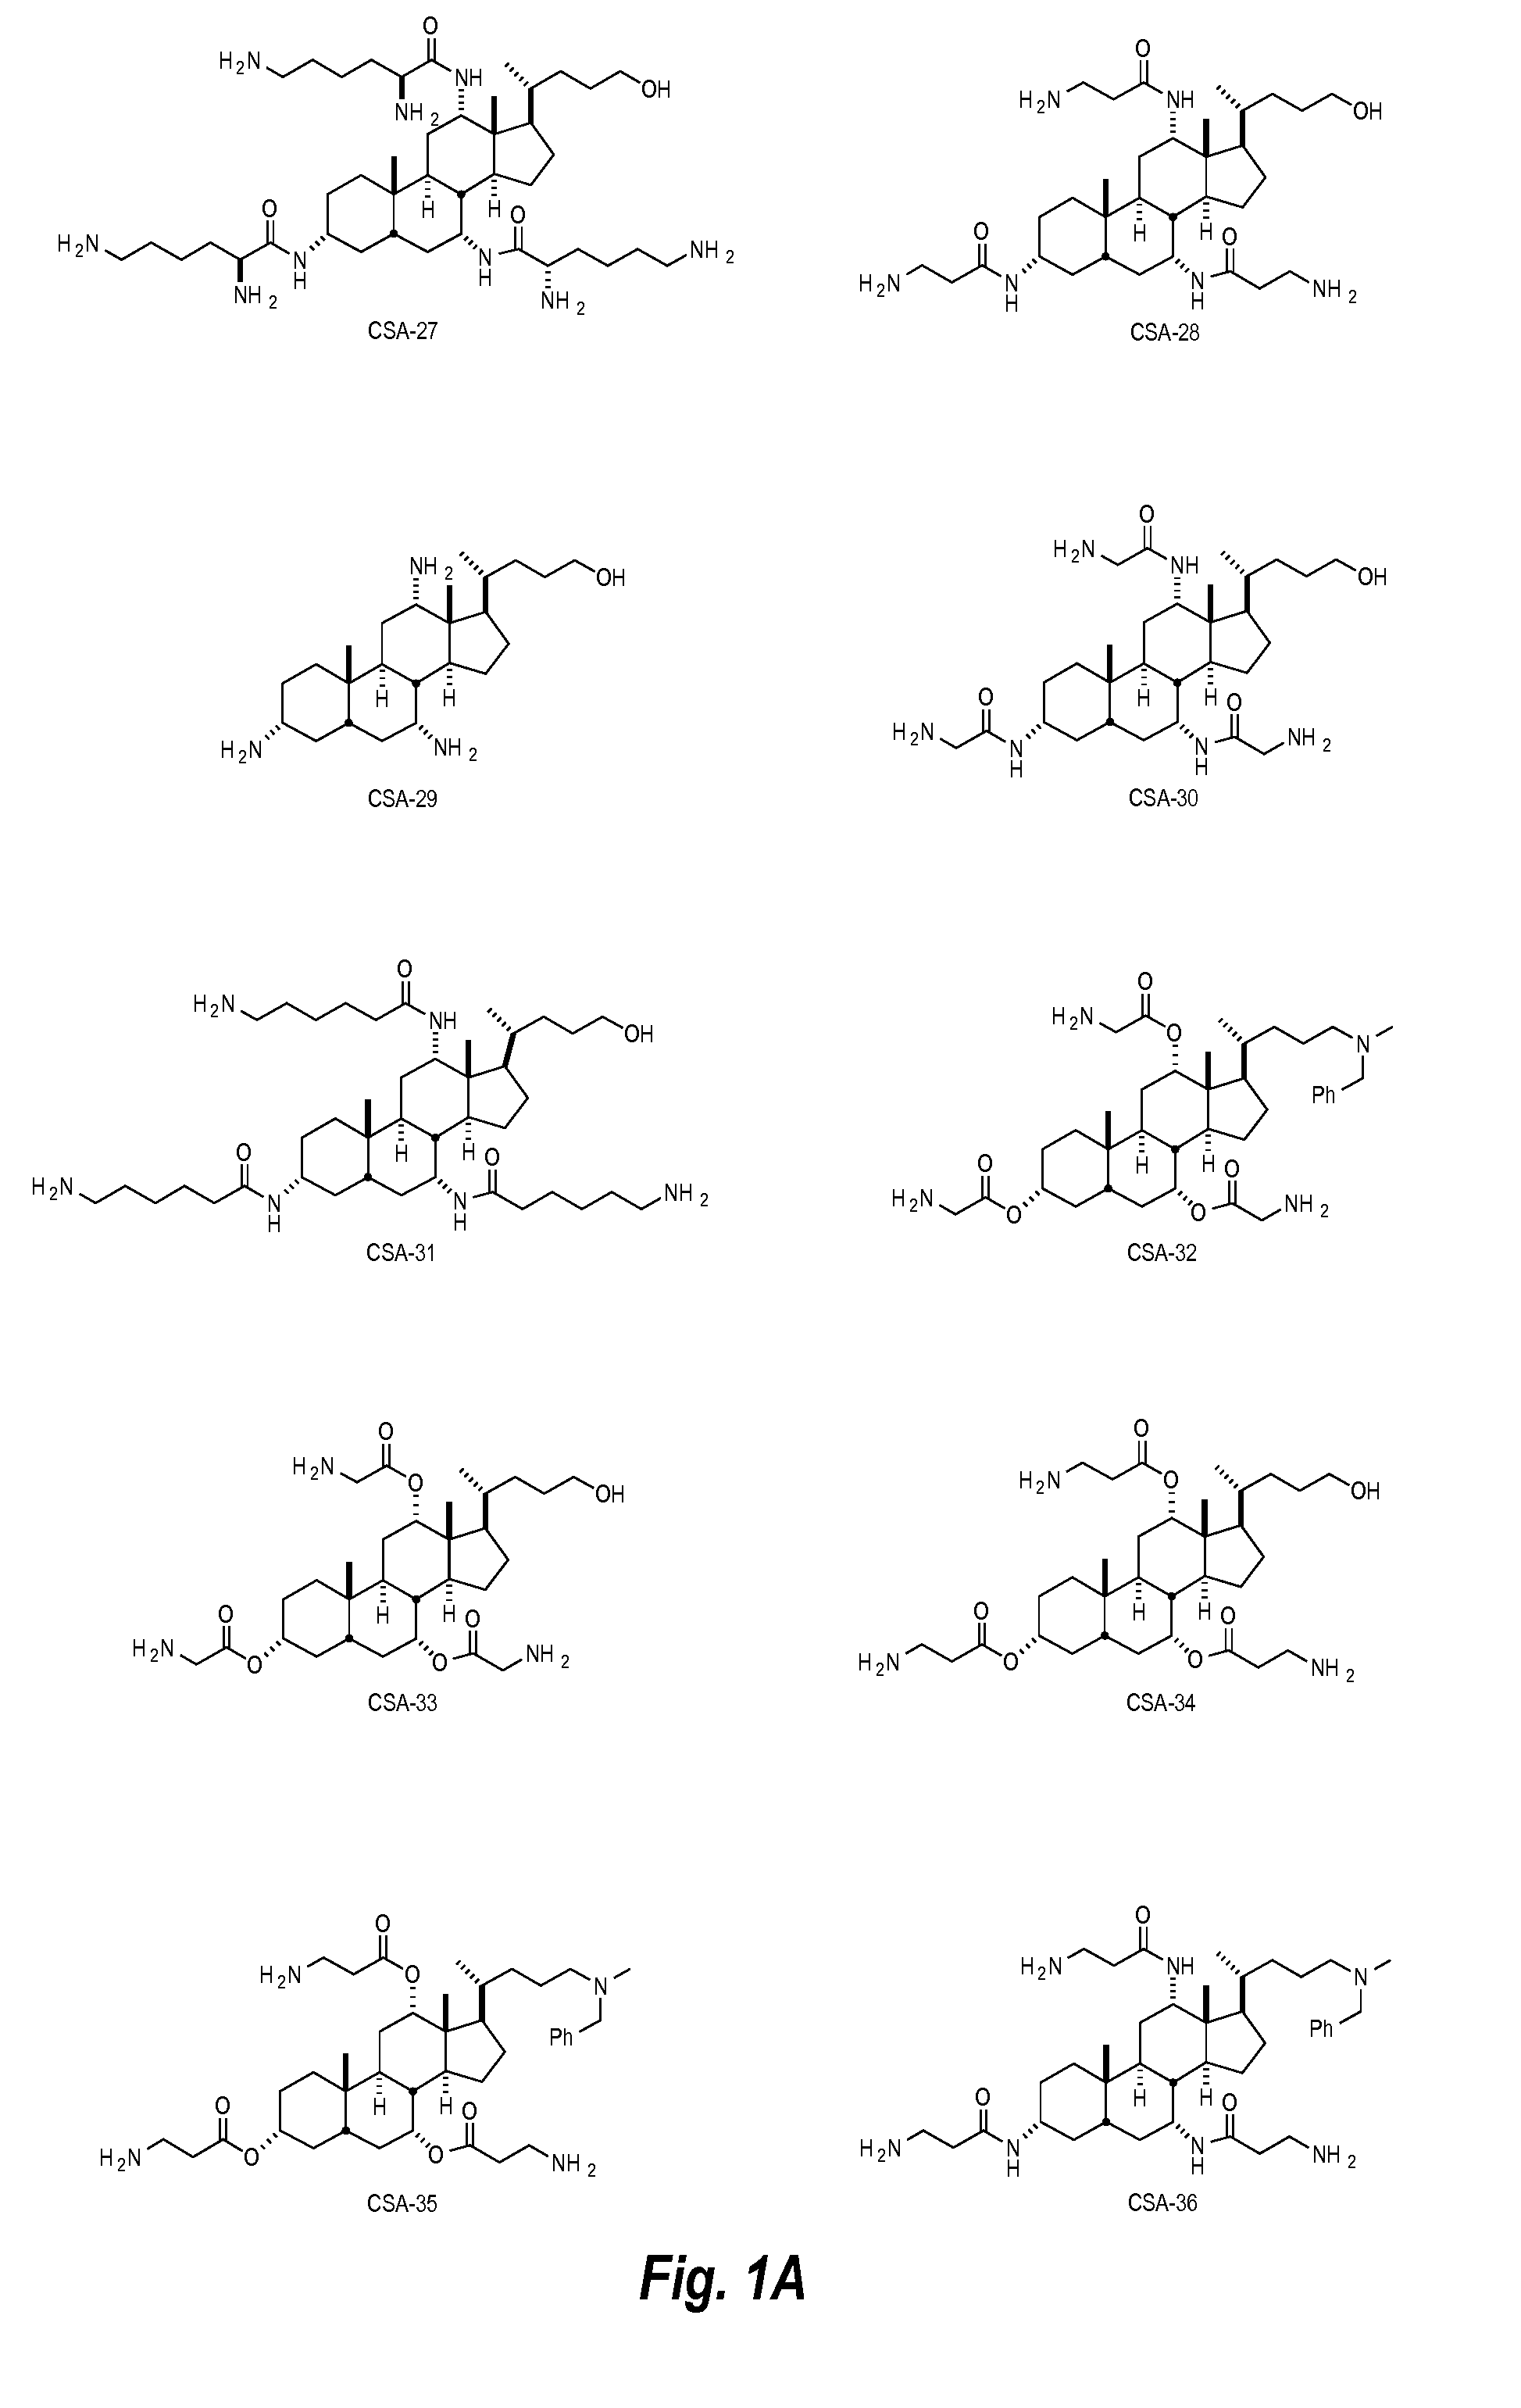 Anti-microbial wash compositions including ceragenin compounds and methods of use for treating non-meat food products